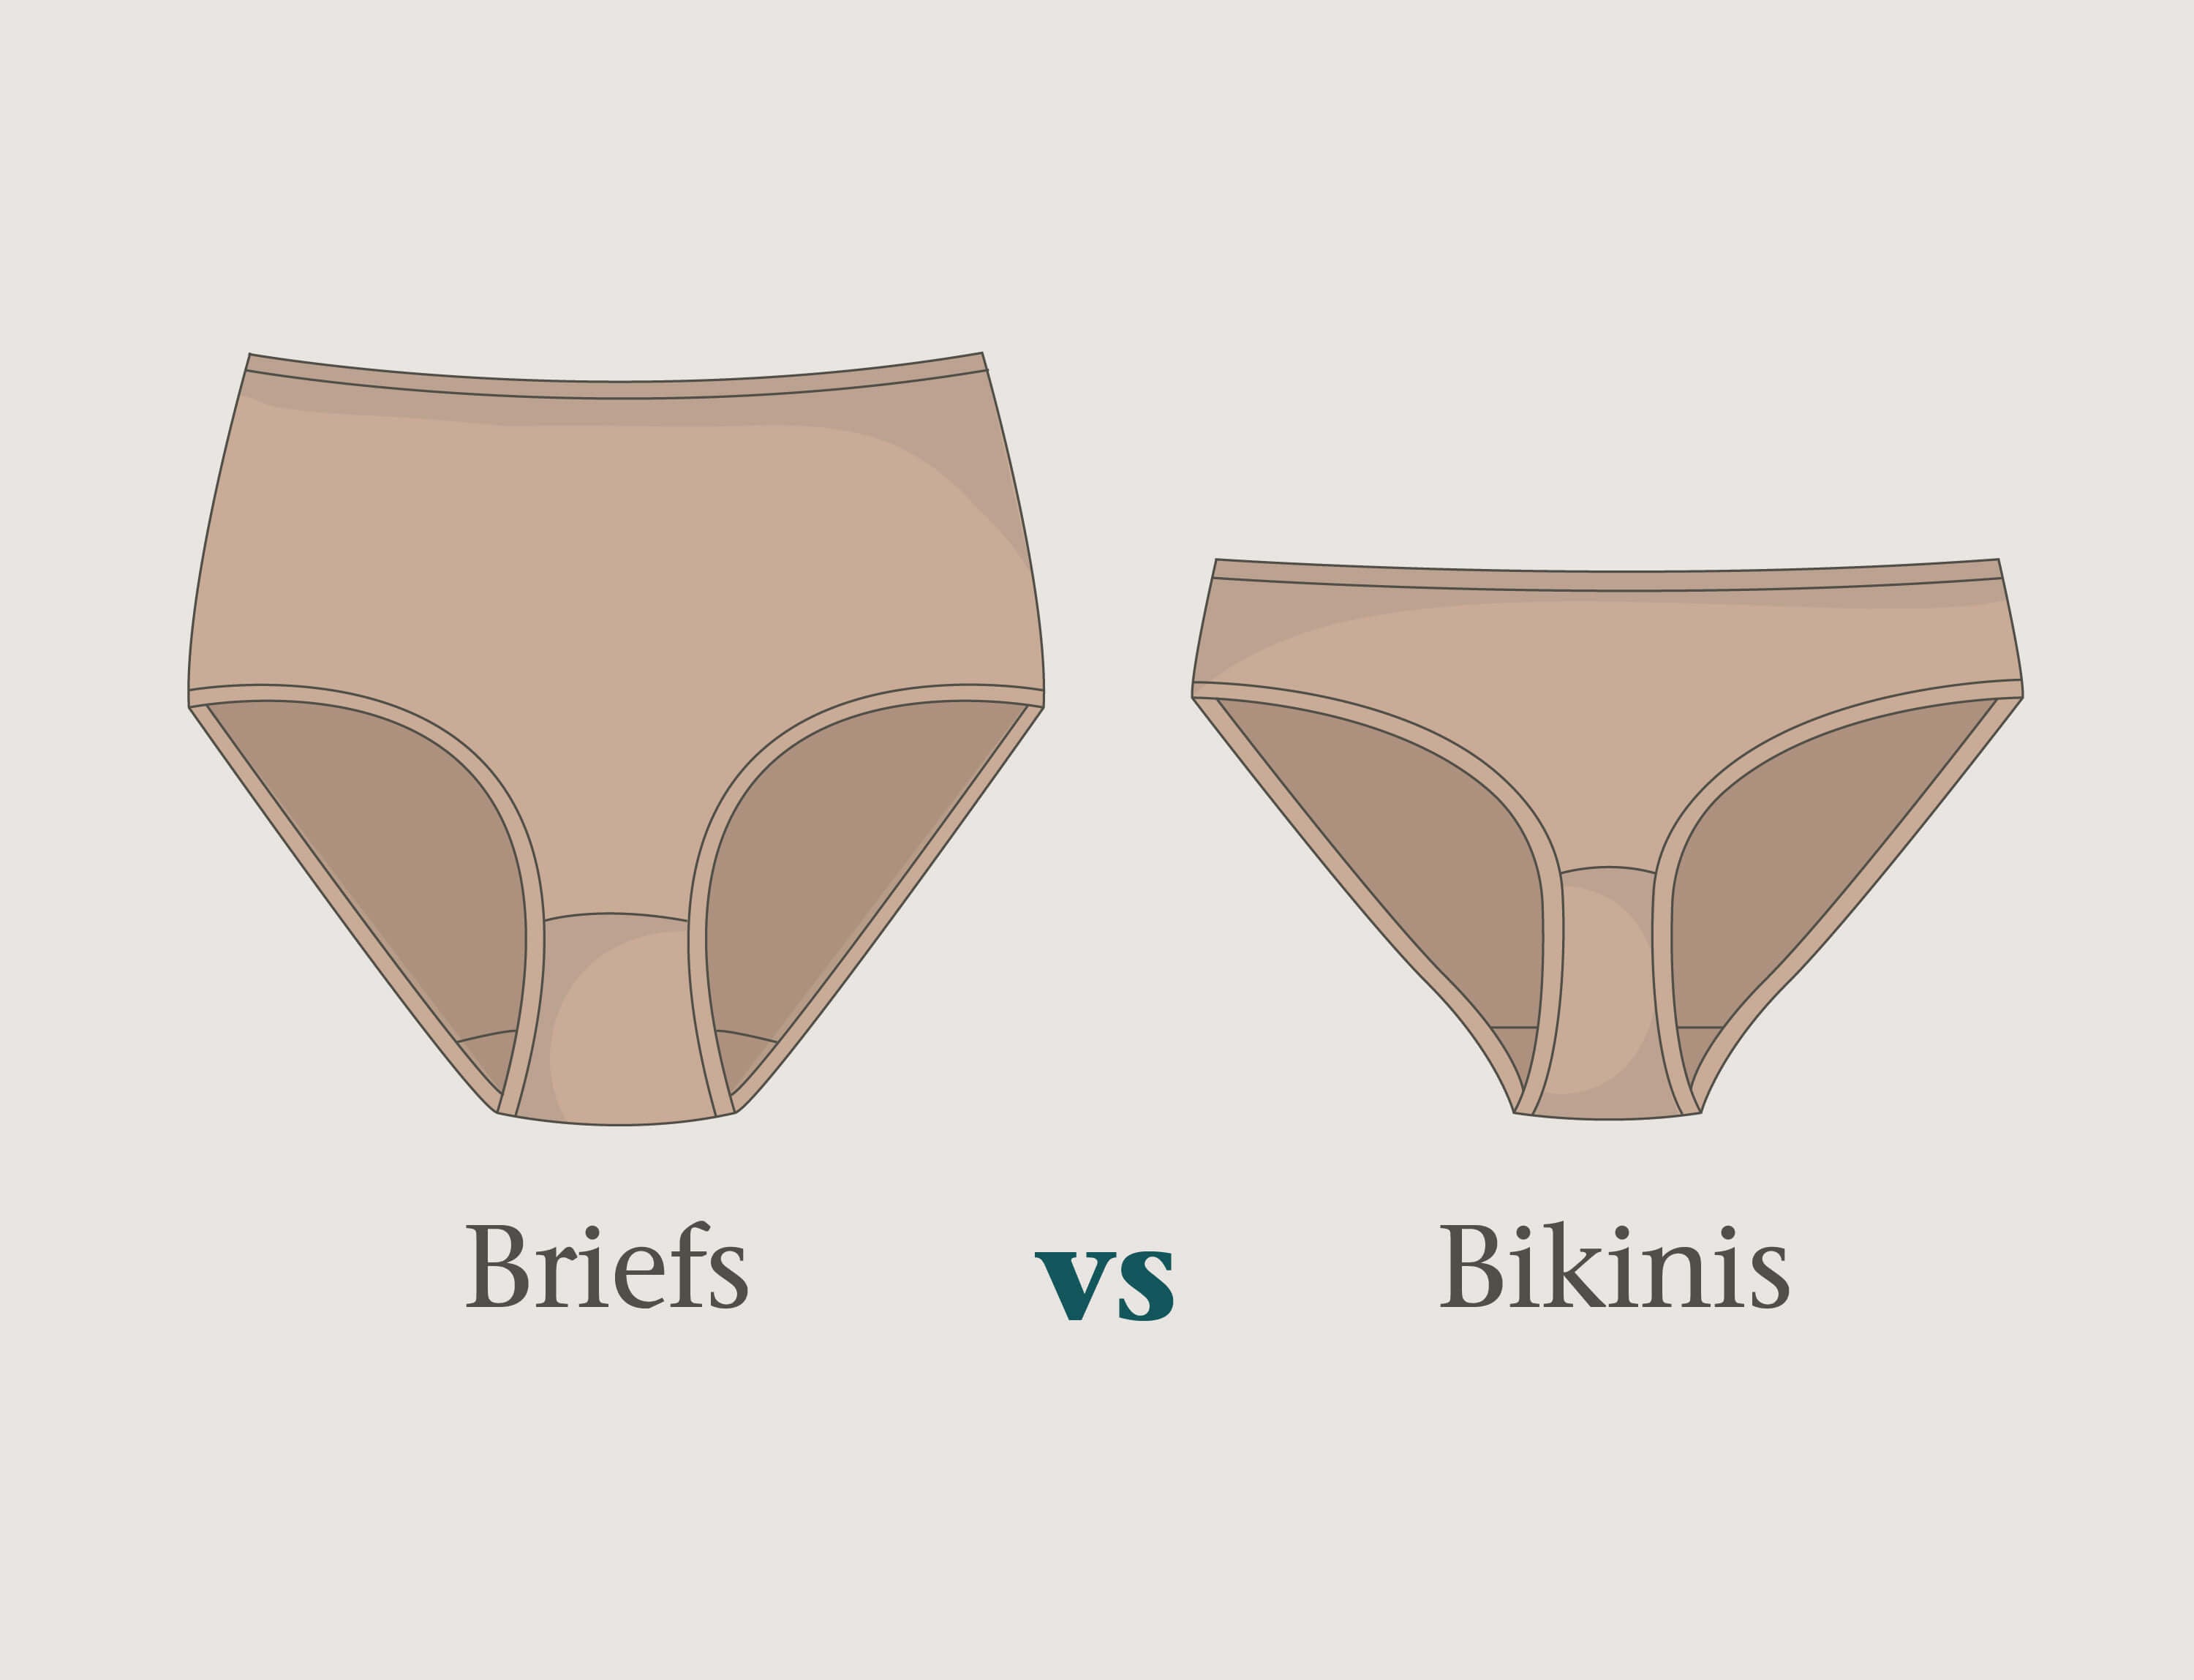 How Should Women's Underwear Fit? Tip: Sizing, Cut & Fabric Matter – Parade